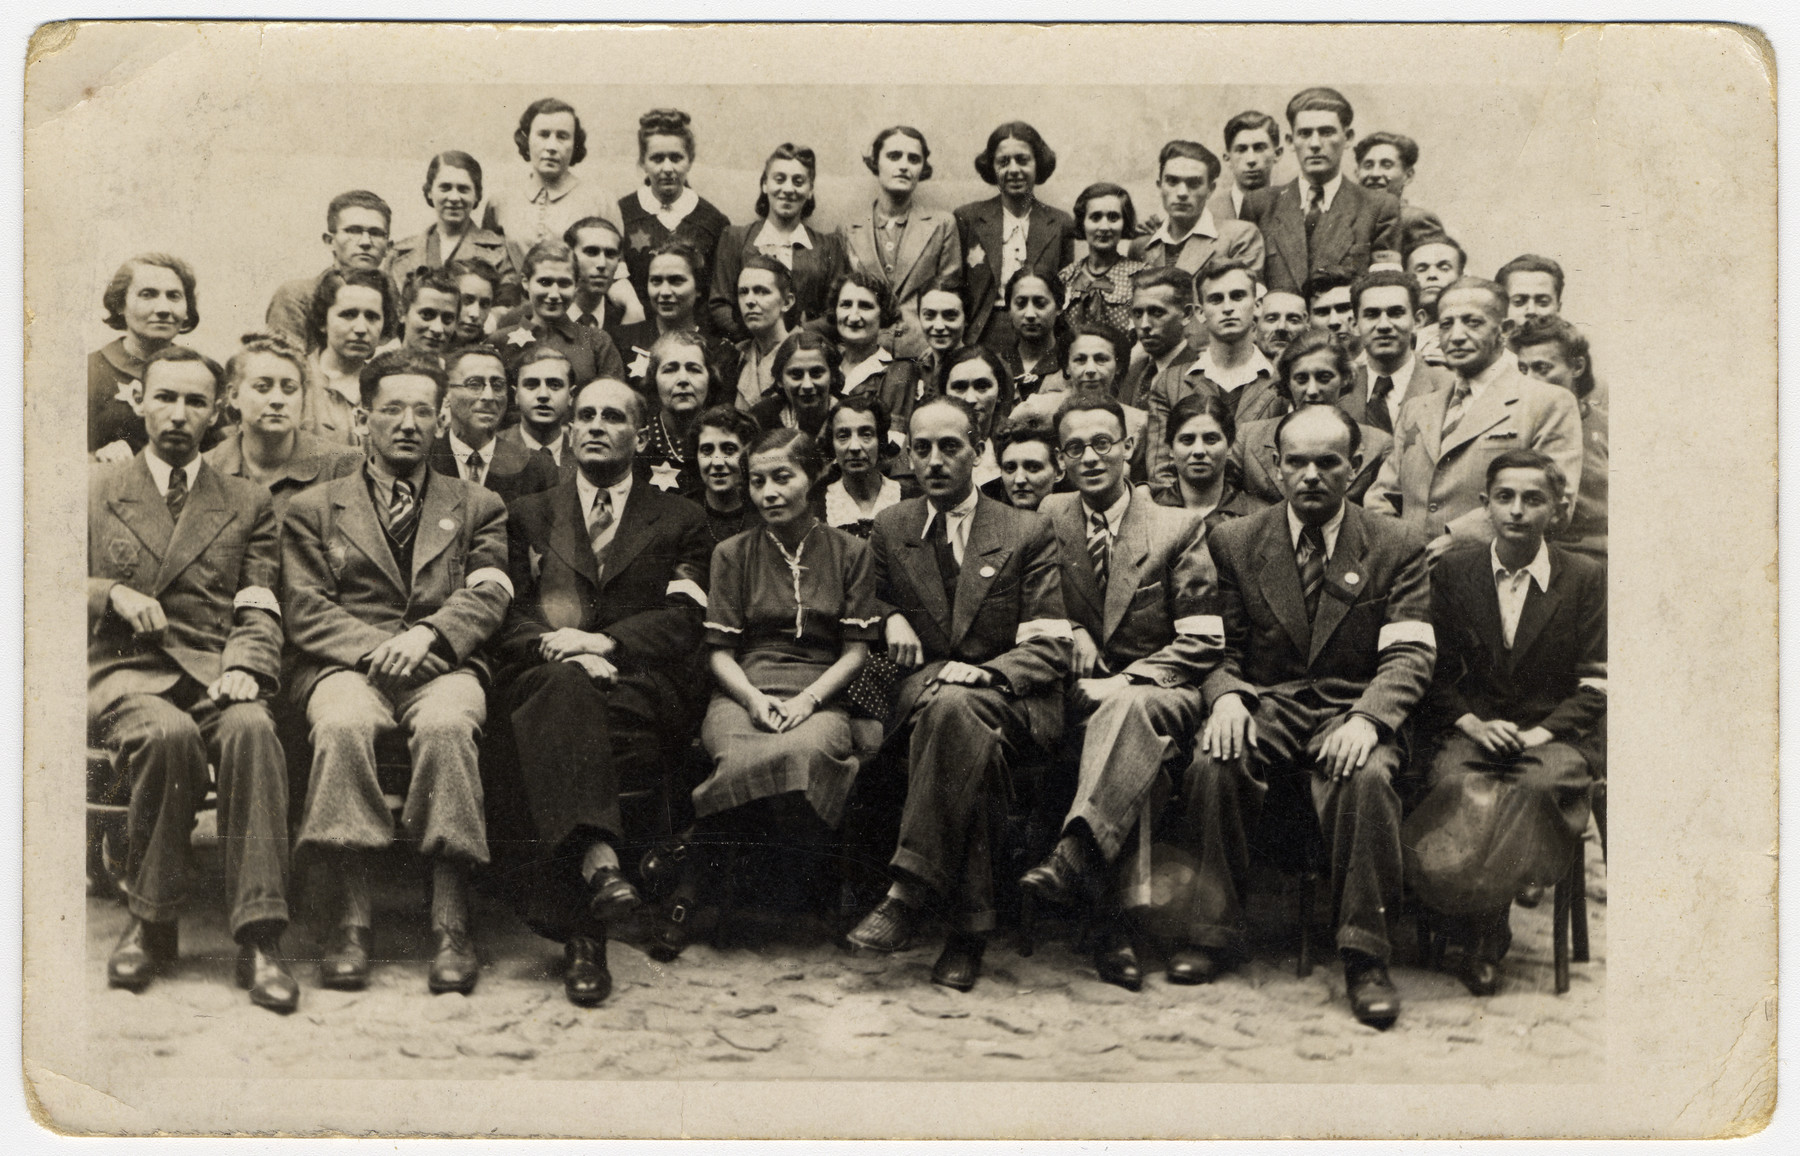 Group portrait of employees of the postal service in the Lodz ghetto.  Herbert Grabe, the head of the Post Office, is sitting third from the left in the front row.